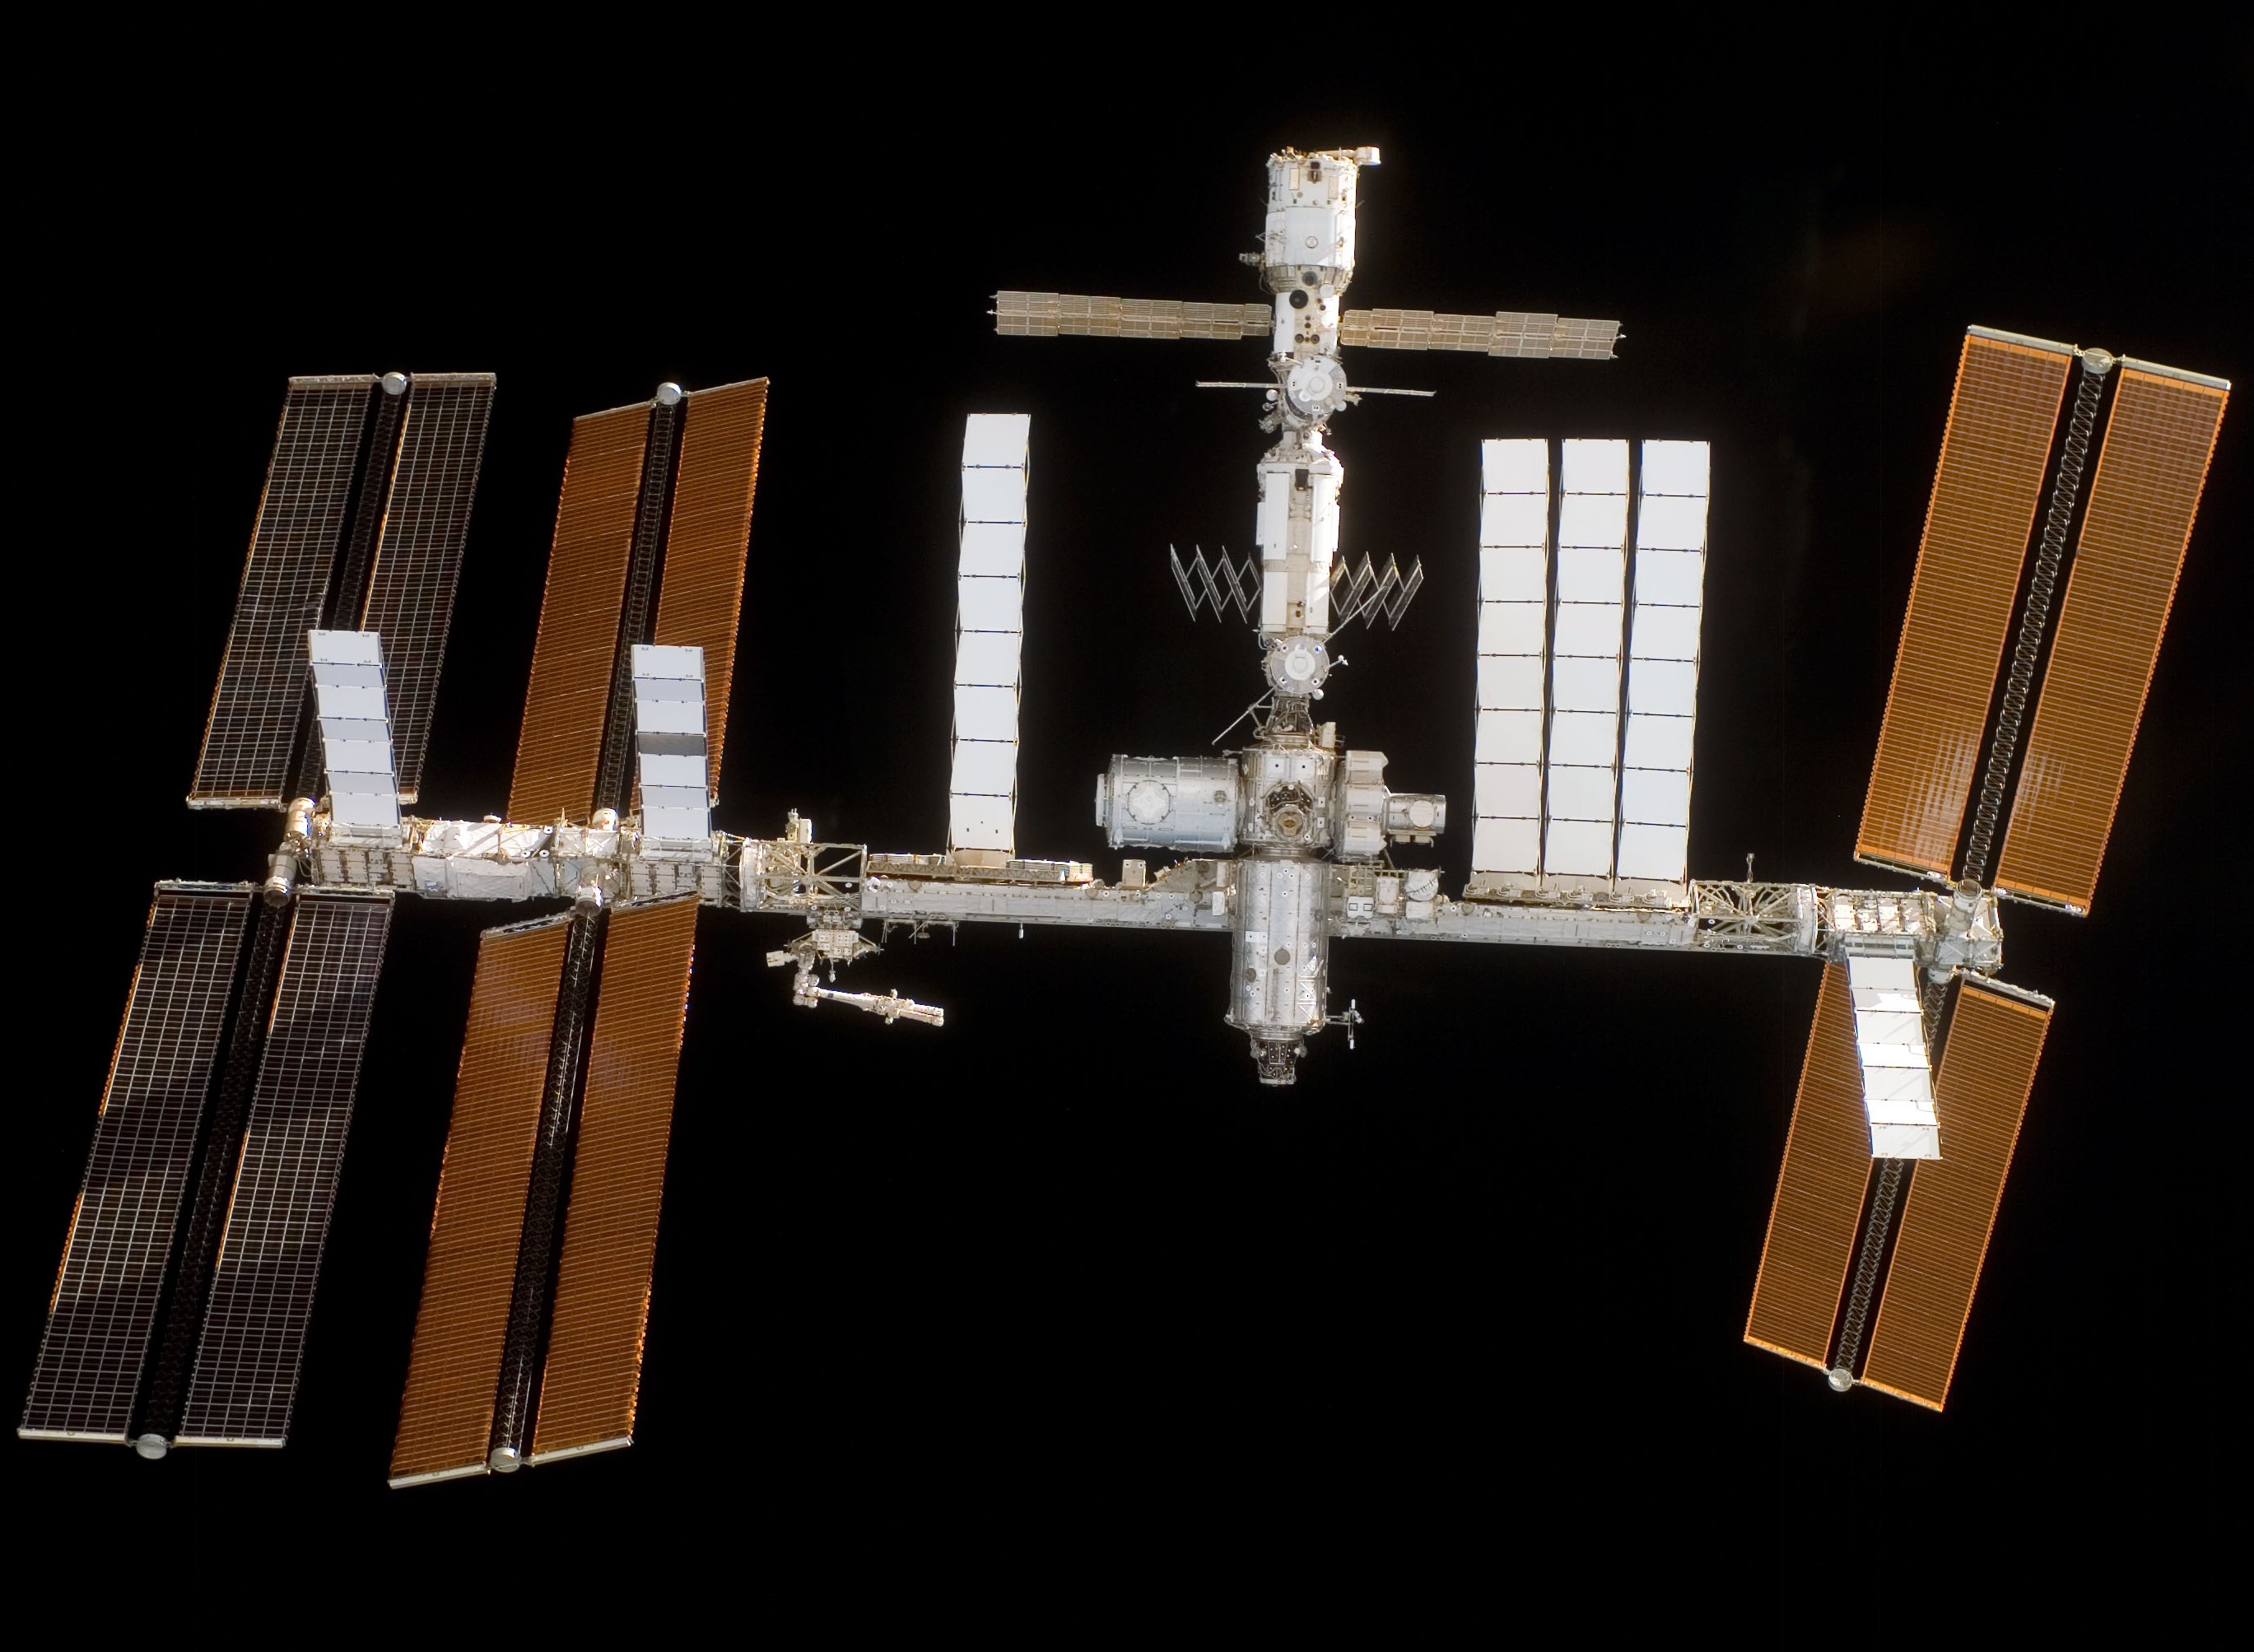 The space station as seen from STS-120 departing, showing the newly delivered Harmony Node 2 module